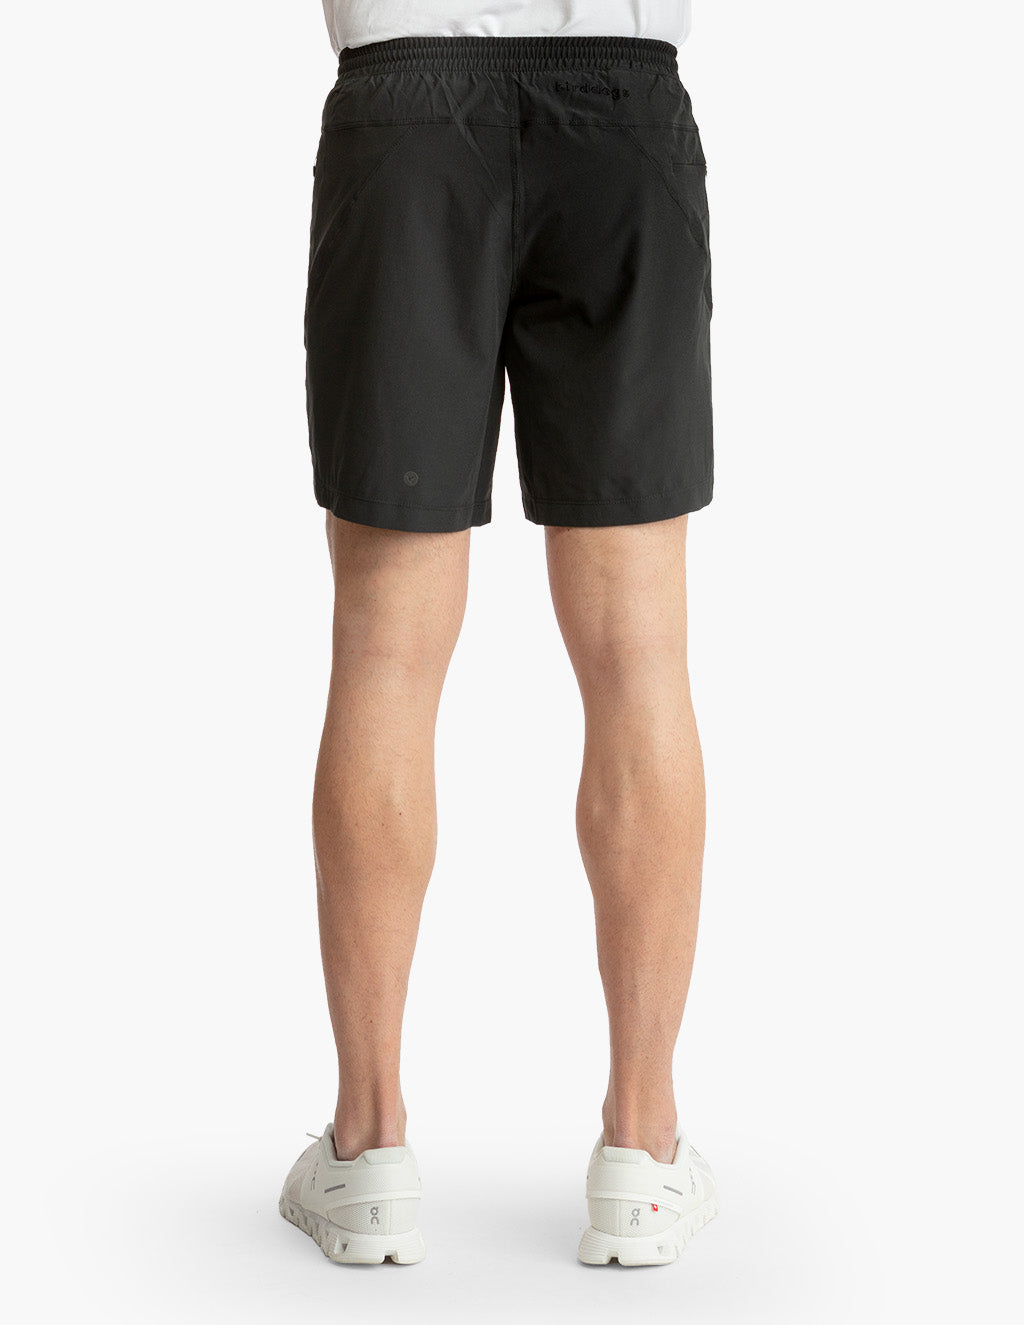 BOOM BOOM BOOTY SHORTS - BLACK SHORTS WITH BOOM BOOM BOOTY LOGO - SEXY!